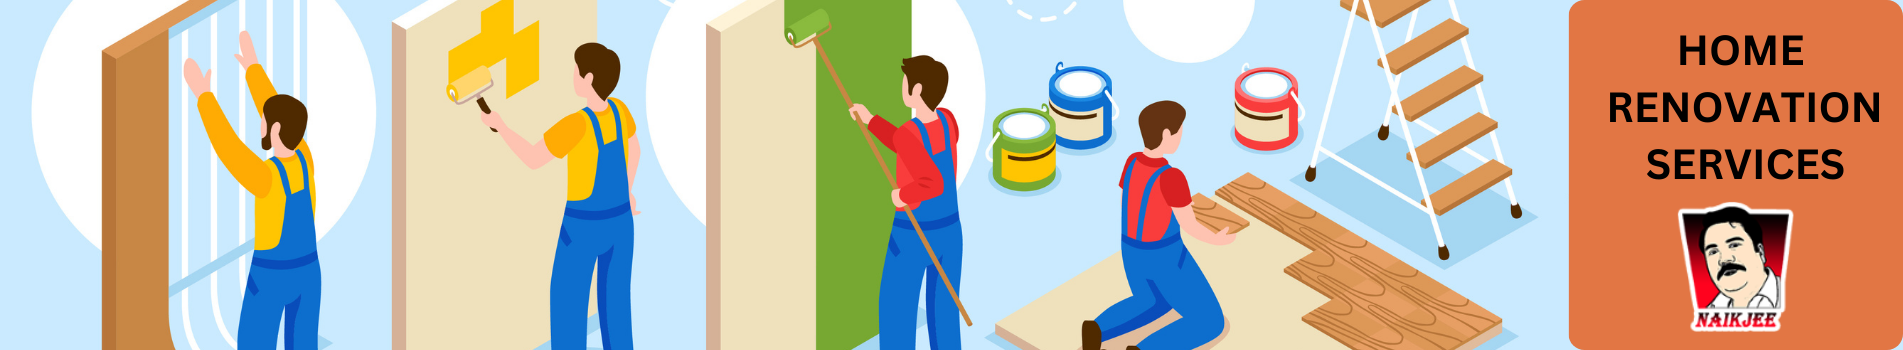 Home renovation services in Jeddah